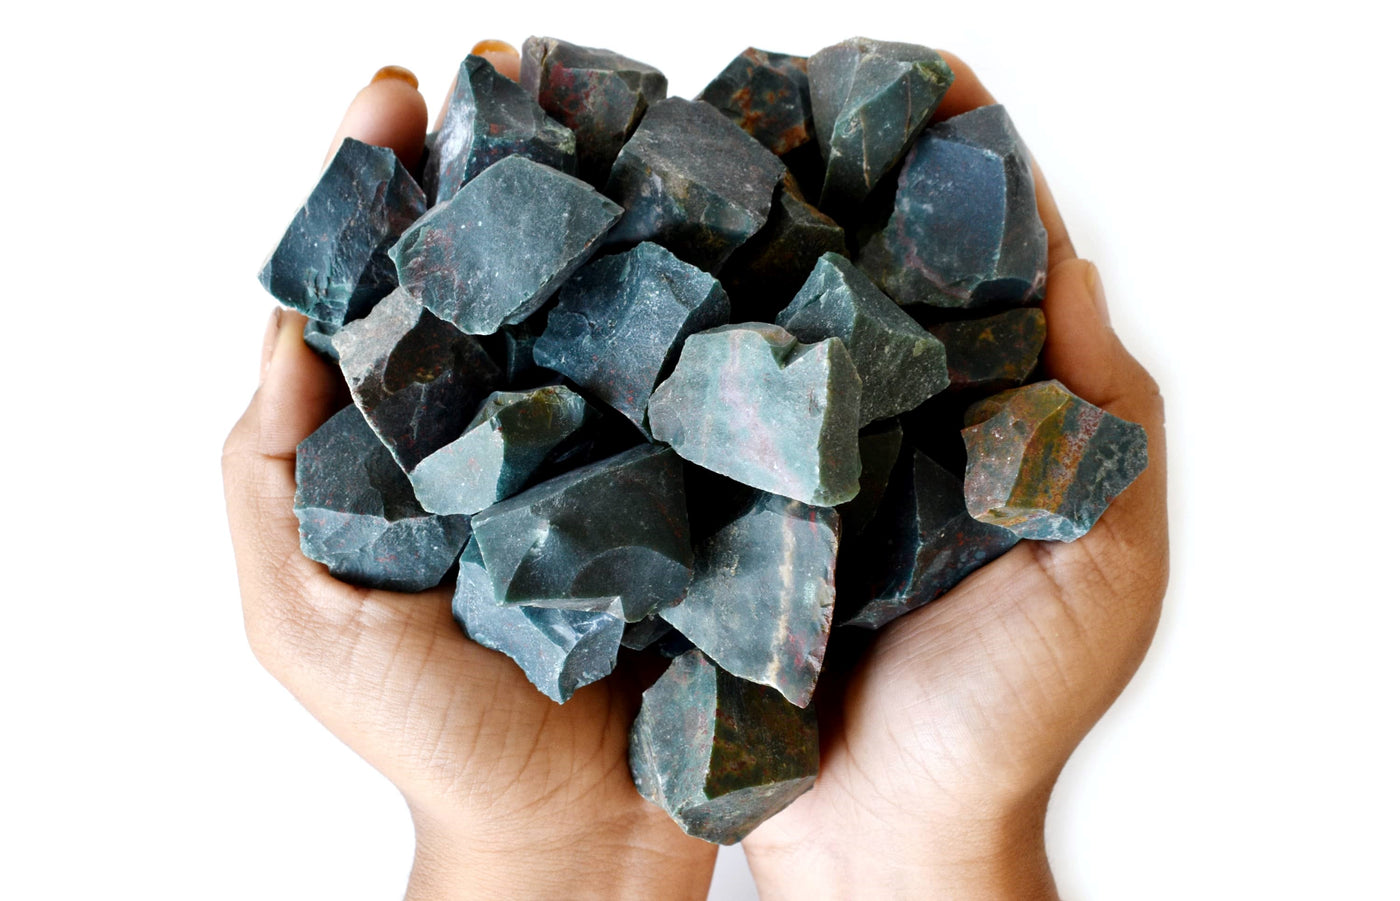 Bloodstone Rough Rocks (Grounding and Protecting)